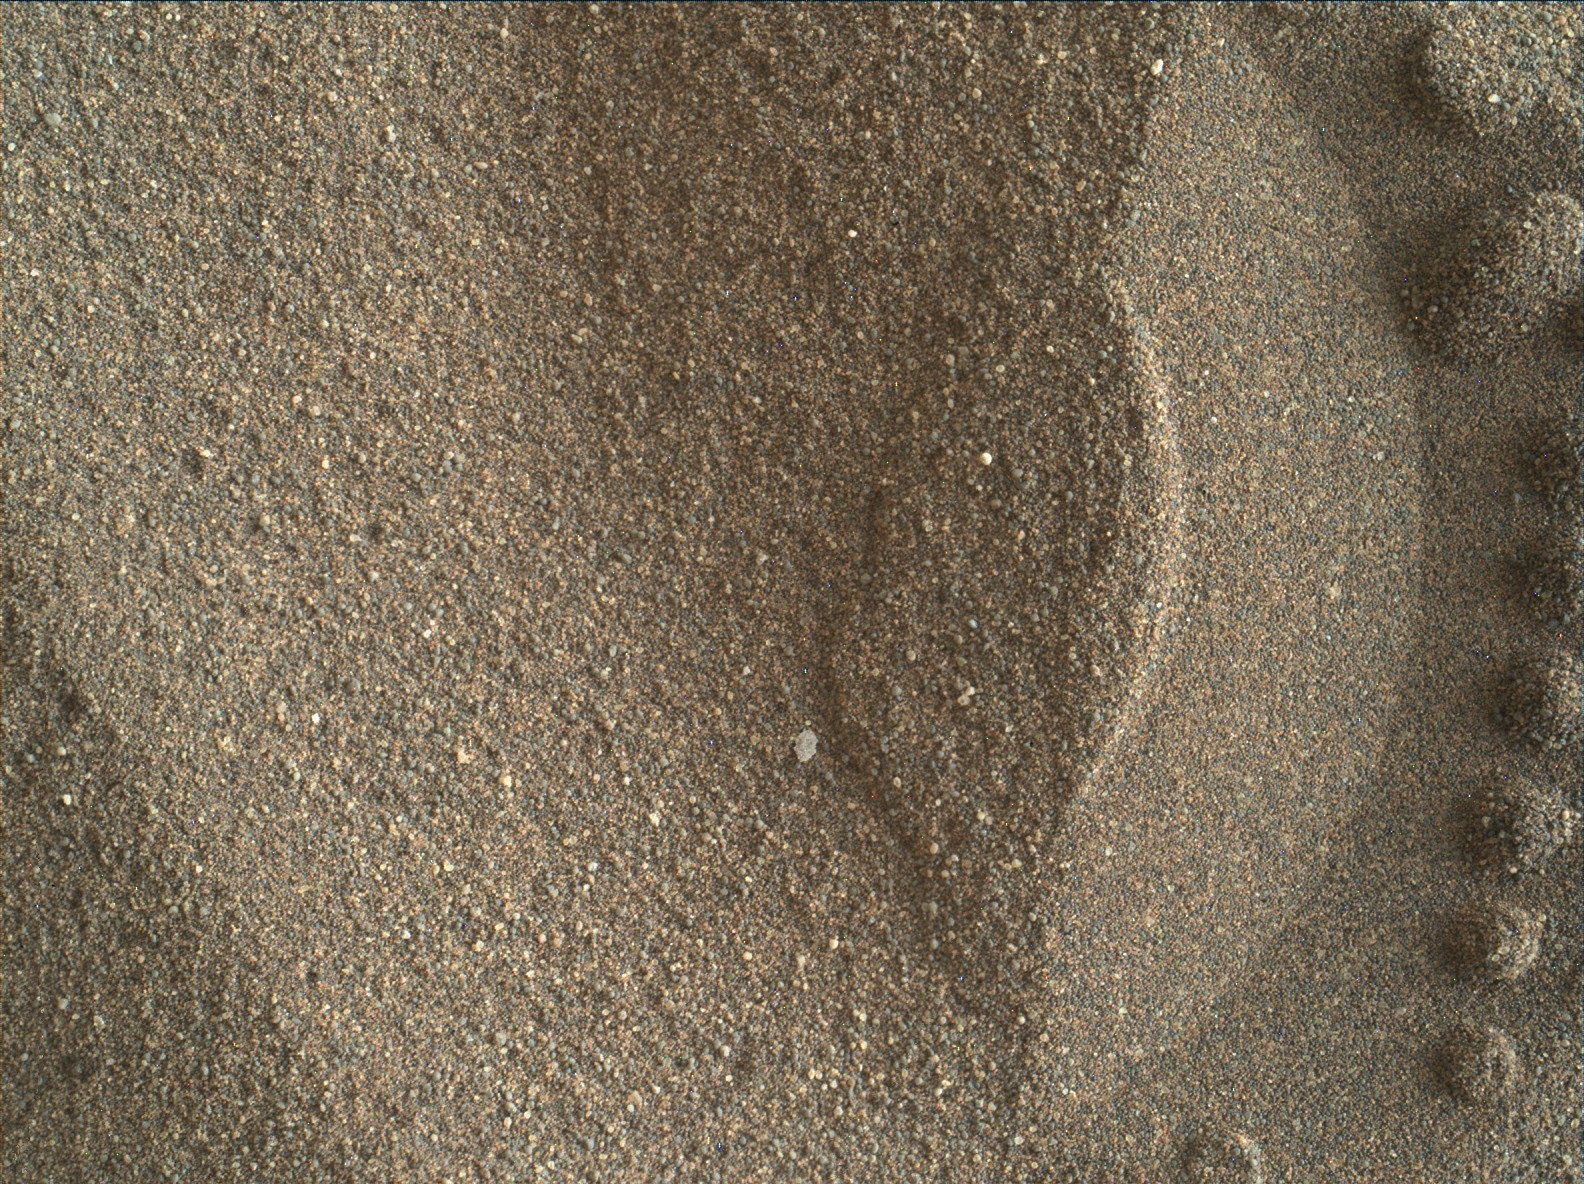 Nasa's Mars rover Curiosity acquired this image using its Mars Hand Lens Imager (MAHLI) on Sol 1903